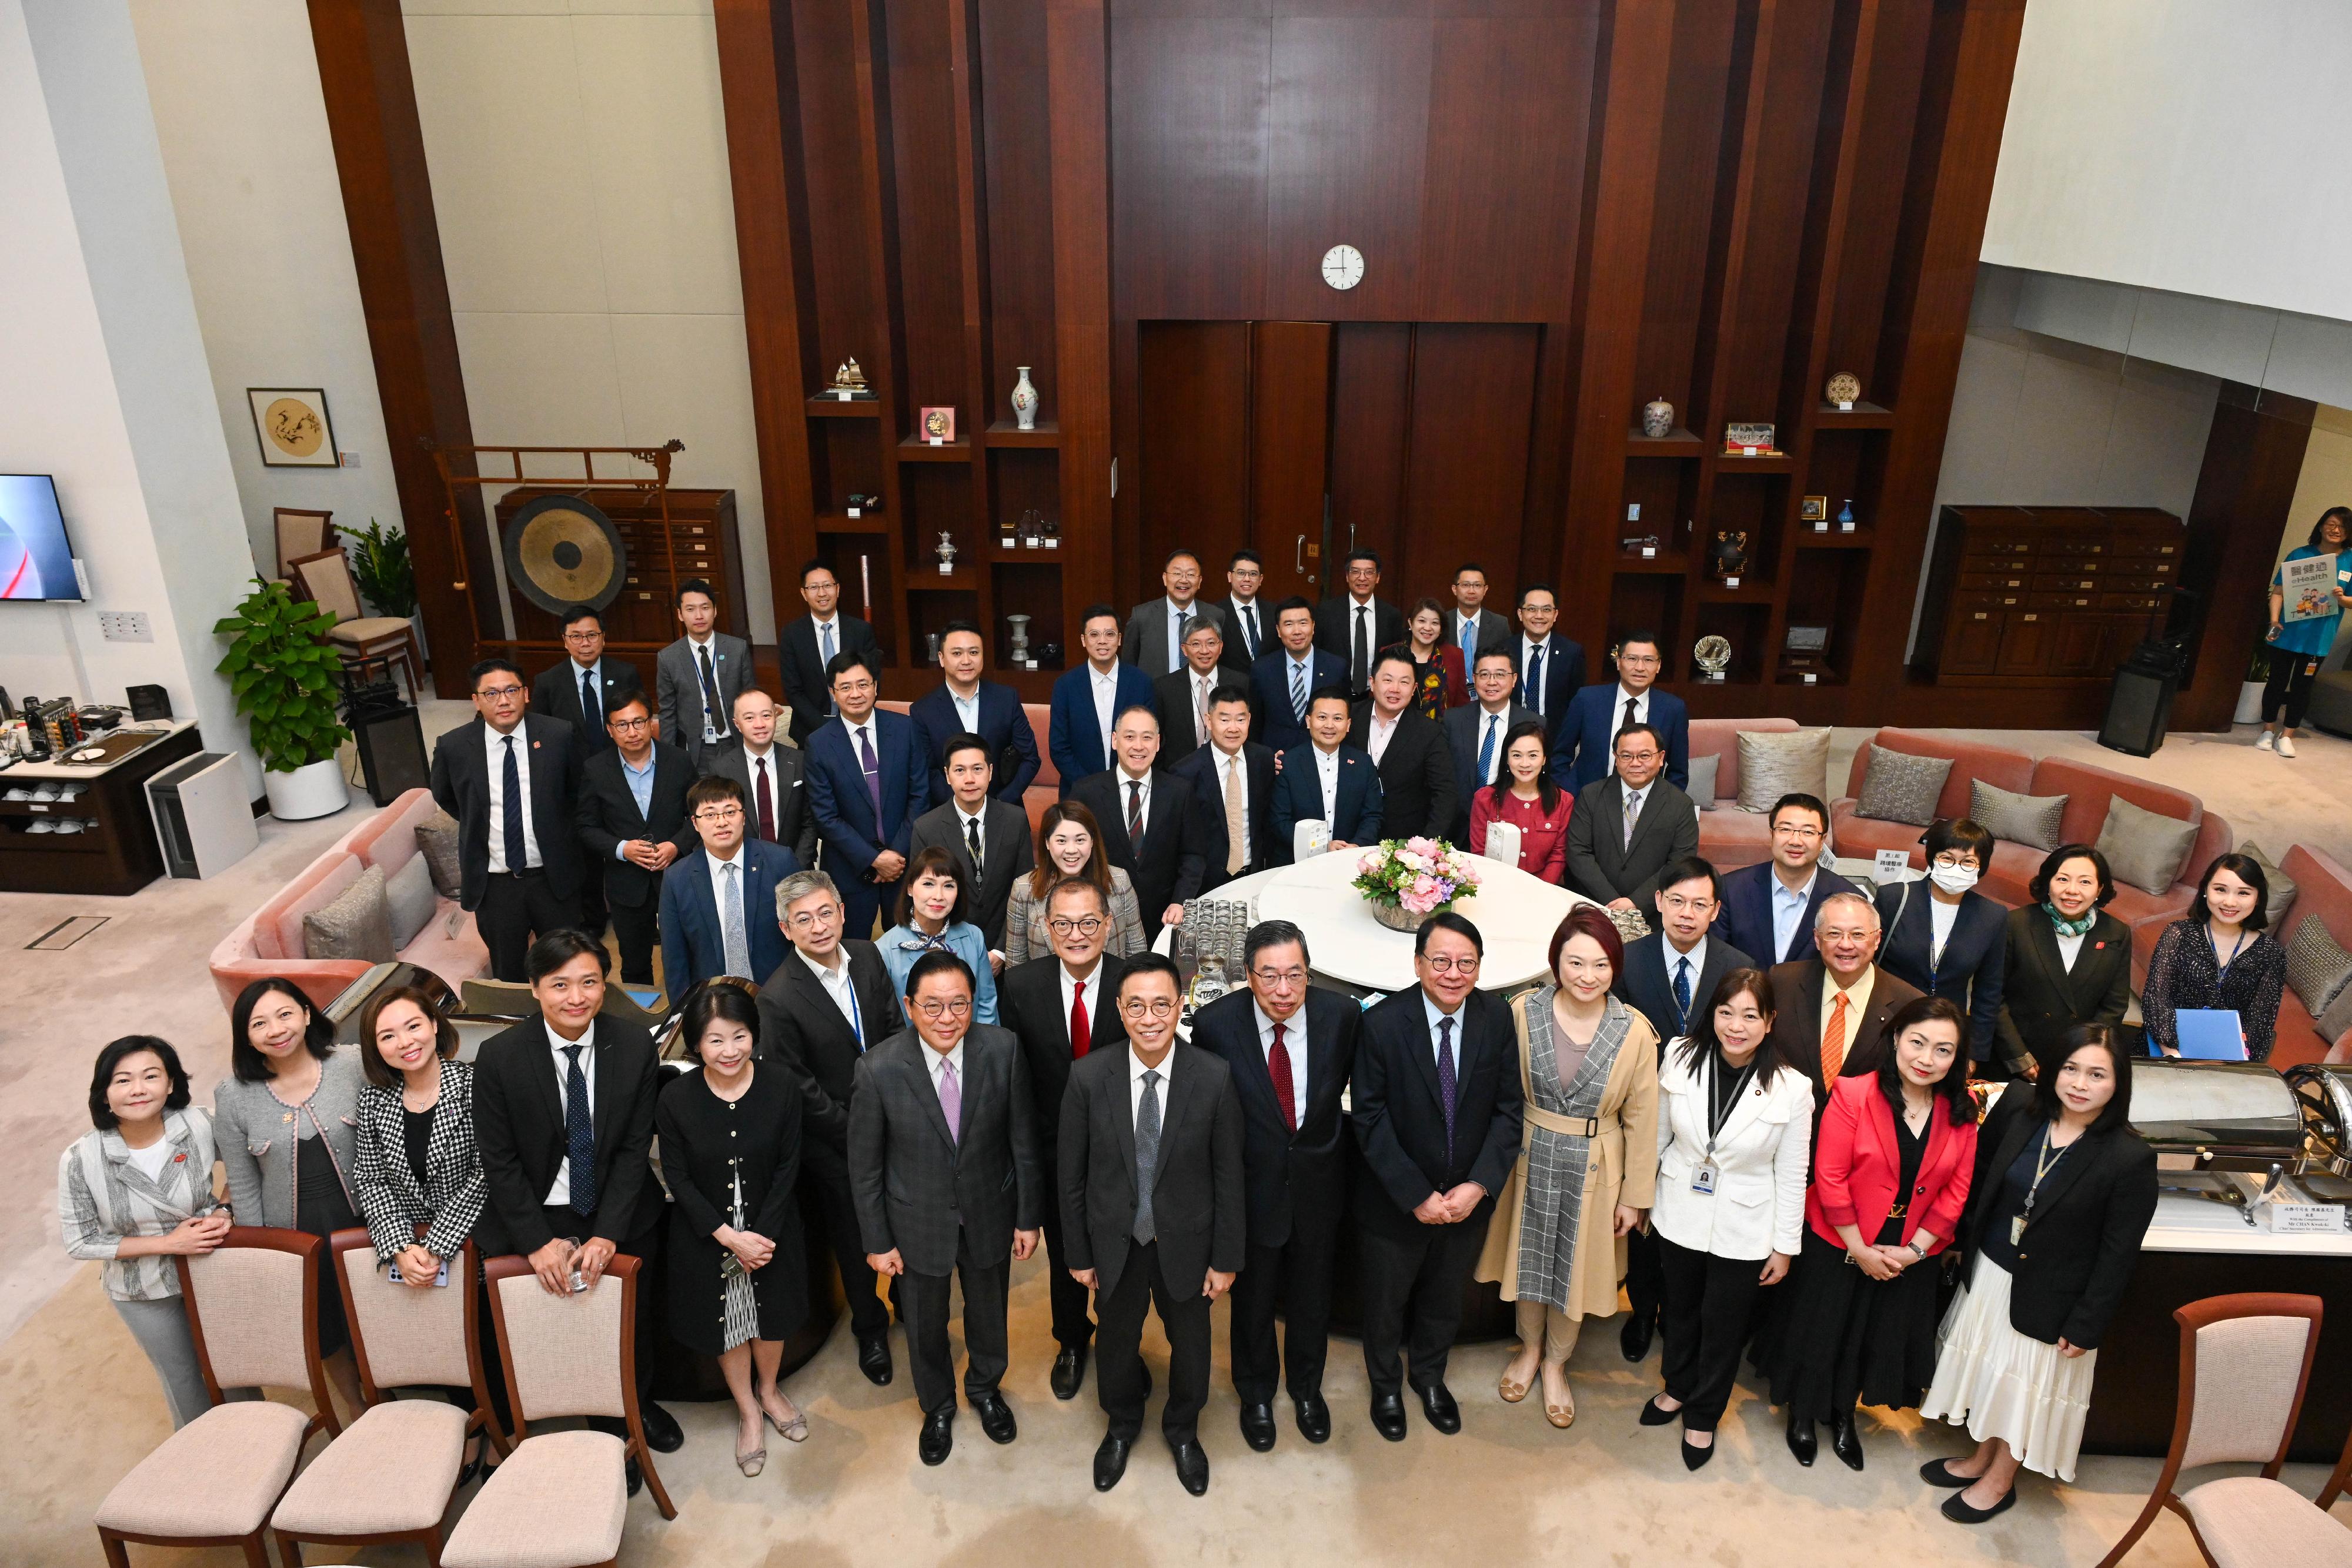 The Chief Secretary for Administration, Mr Chan Kwok-ki, attended the Ante Chamber exchange session at the Legislative Council (LegCo) today (April 10). Photo shows Mr Chan (first row, fifth right); the President of the LegCo, Mr Andrew Leung (first row, sixth right); the Secretary for Culture, Sports and Tourism, Mr Kevin Yeung (first row, seventh right); the Secretary for Health, Professor Lo Chung-mau (first row, seventh left); the Secretary for Home and Youth Affairs, Miss Alice Mak (third row, second right), with LegCo Members before the meeting.
